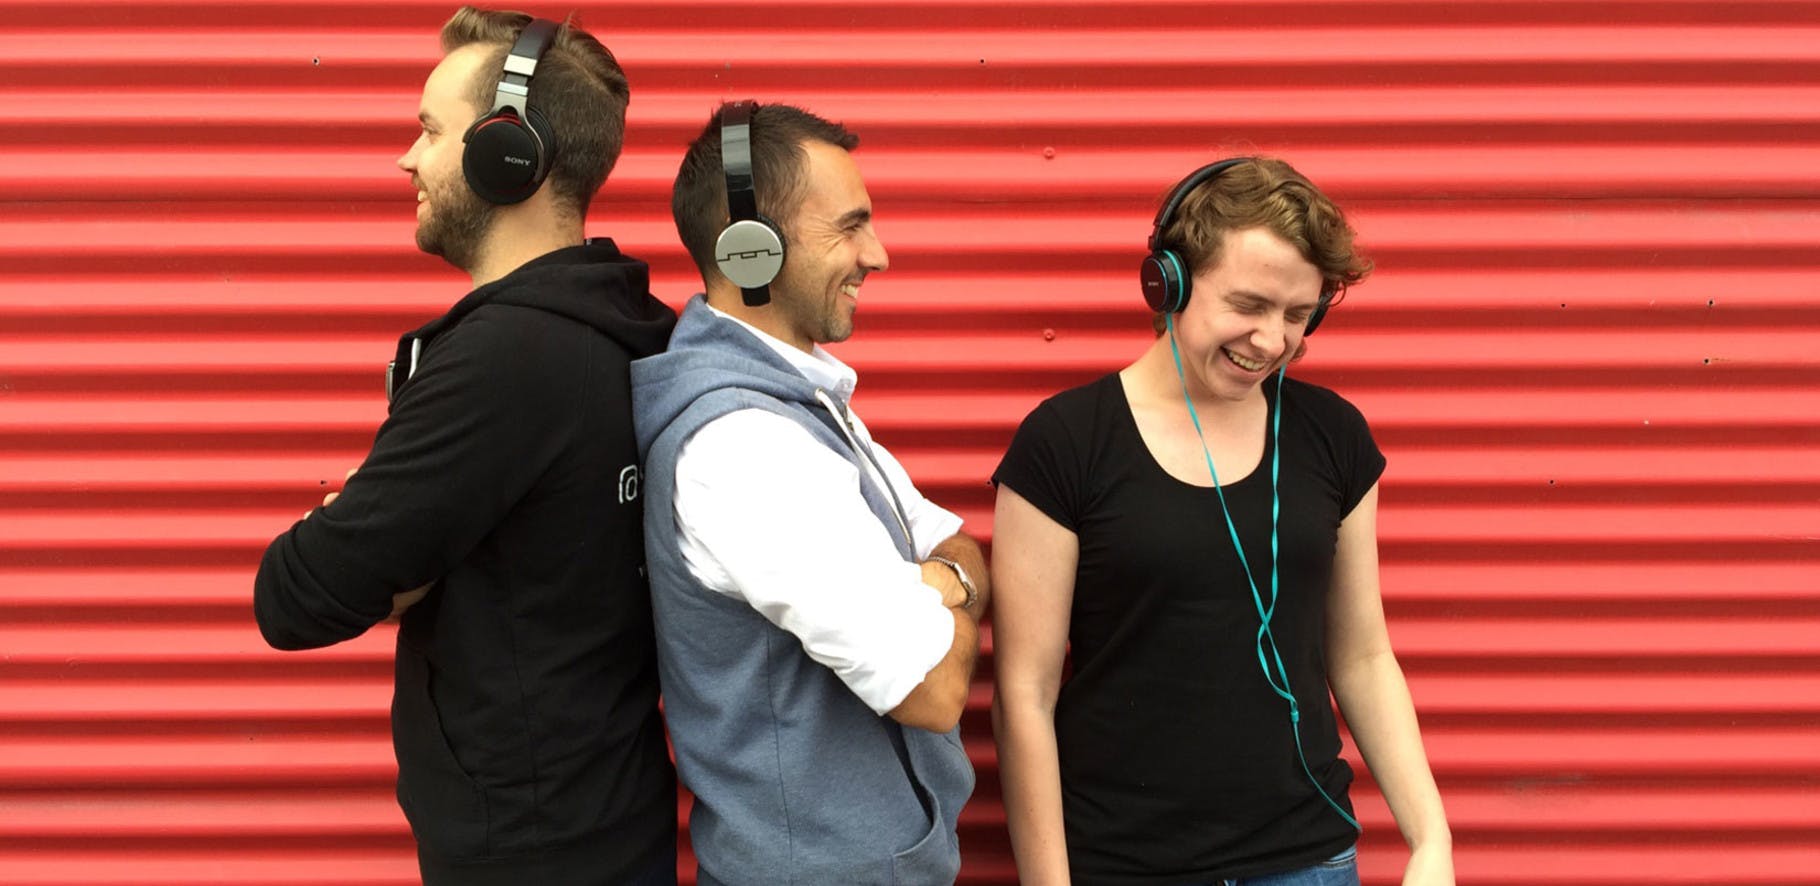 three people wearing headphones are smiling and laughing whilst standing against a bright red corrugated metal background